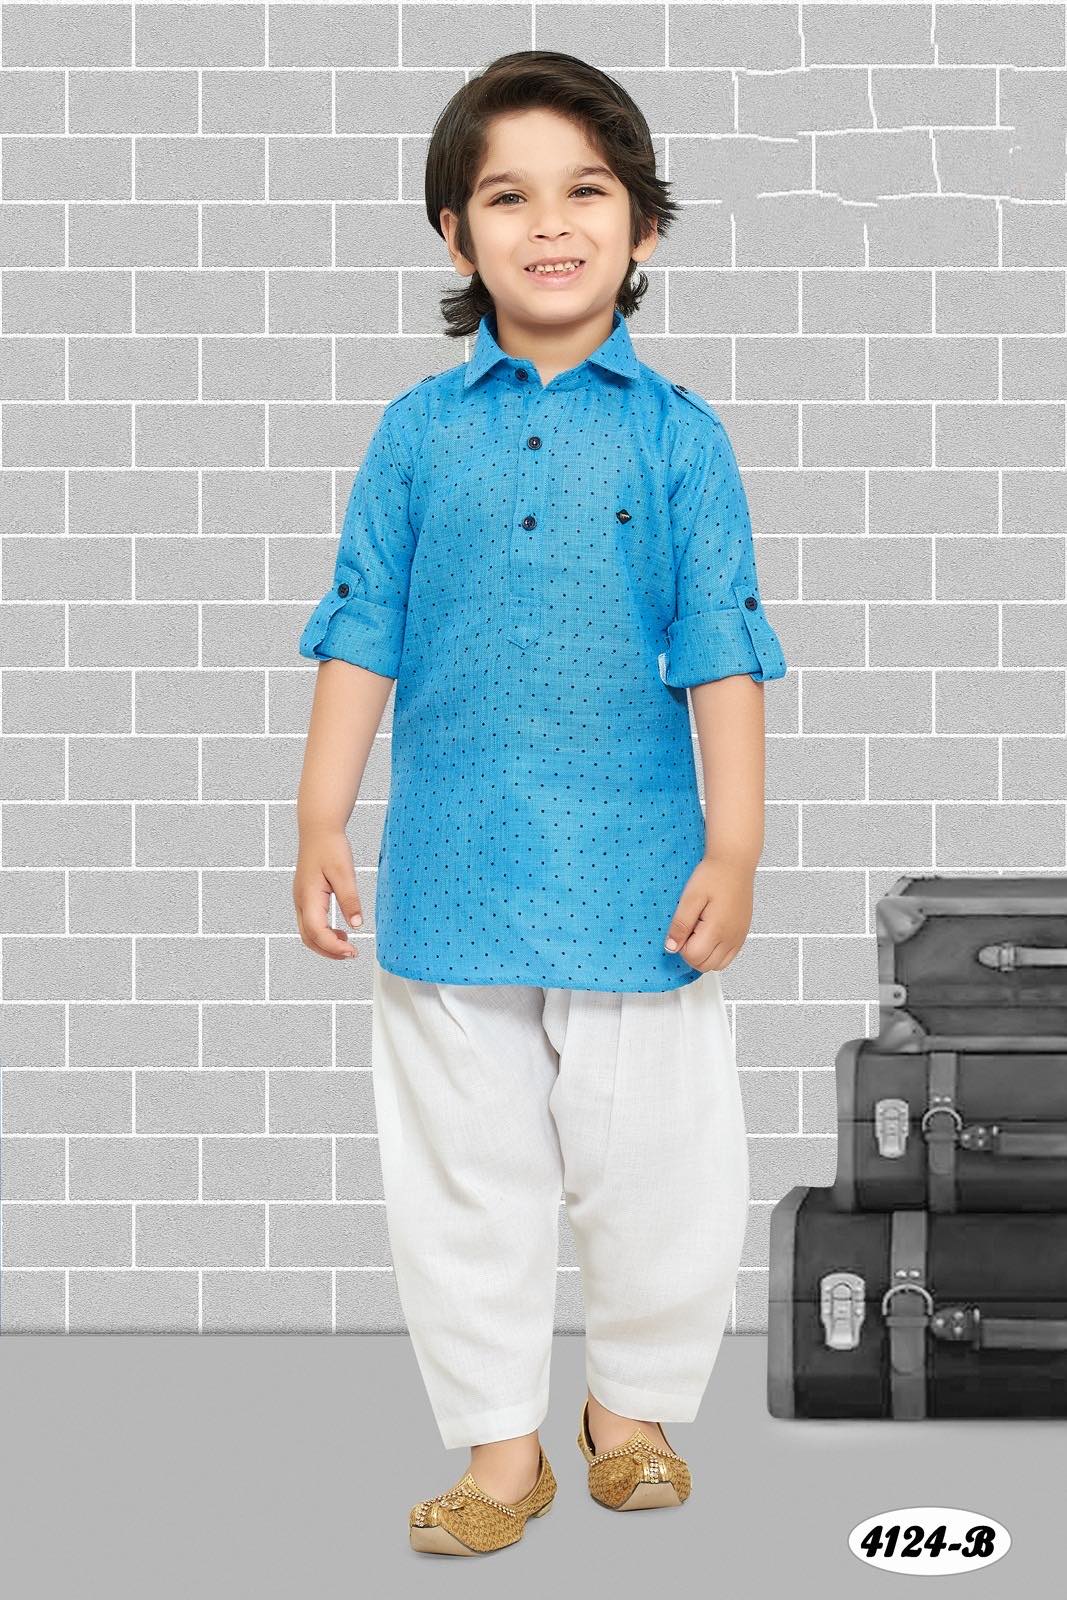 Boys pathani suit Shopping - Buy 1 to 16 years kids Pathani Suits online